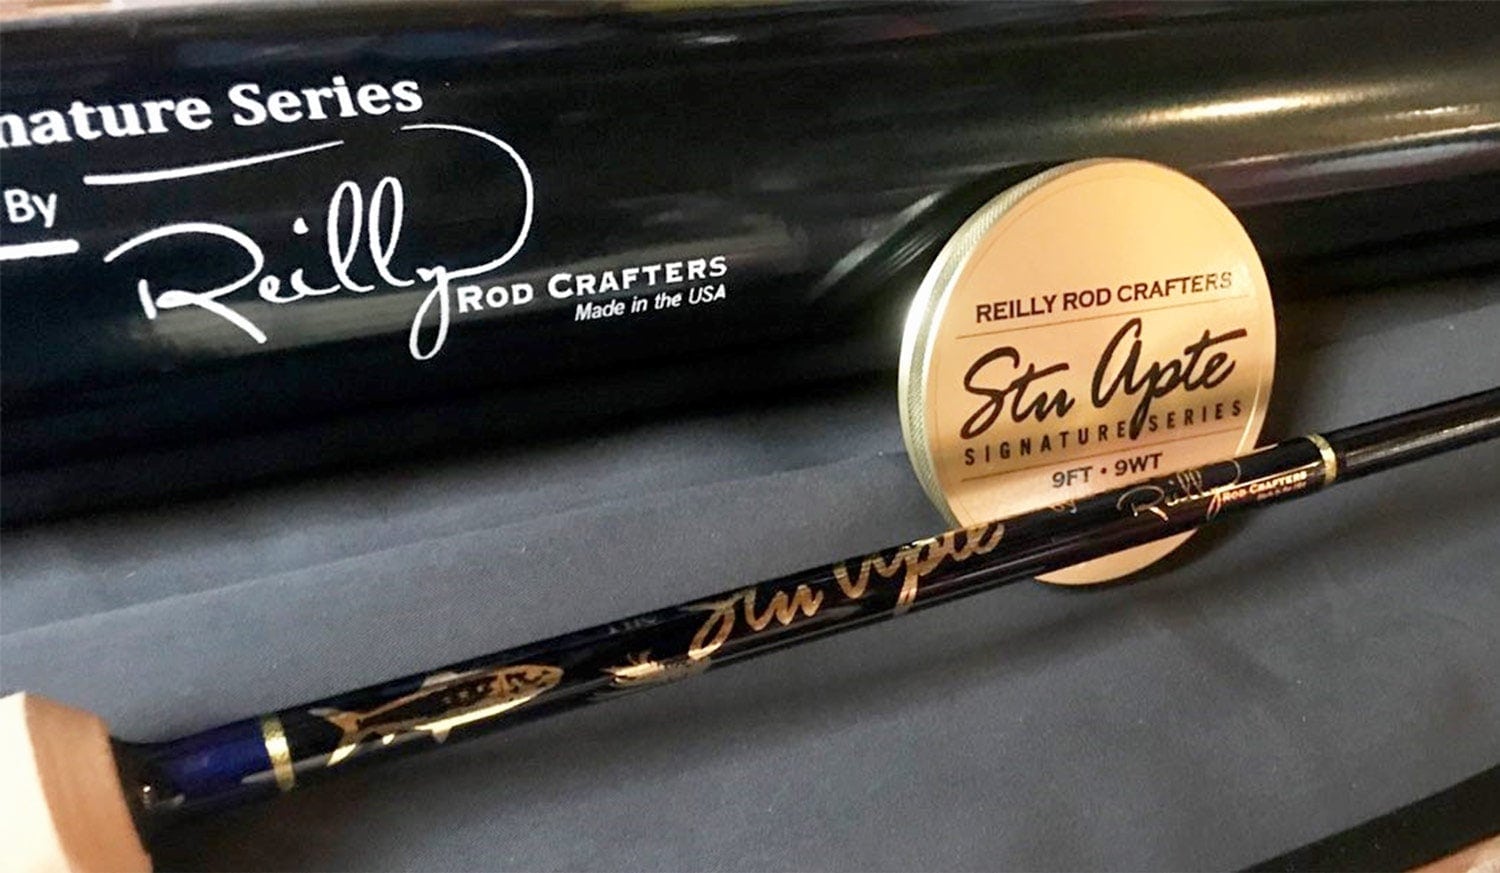 Stu Apte Signature Series Rods by Reilly Rod Crafters